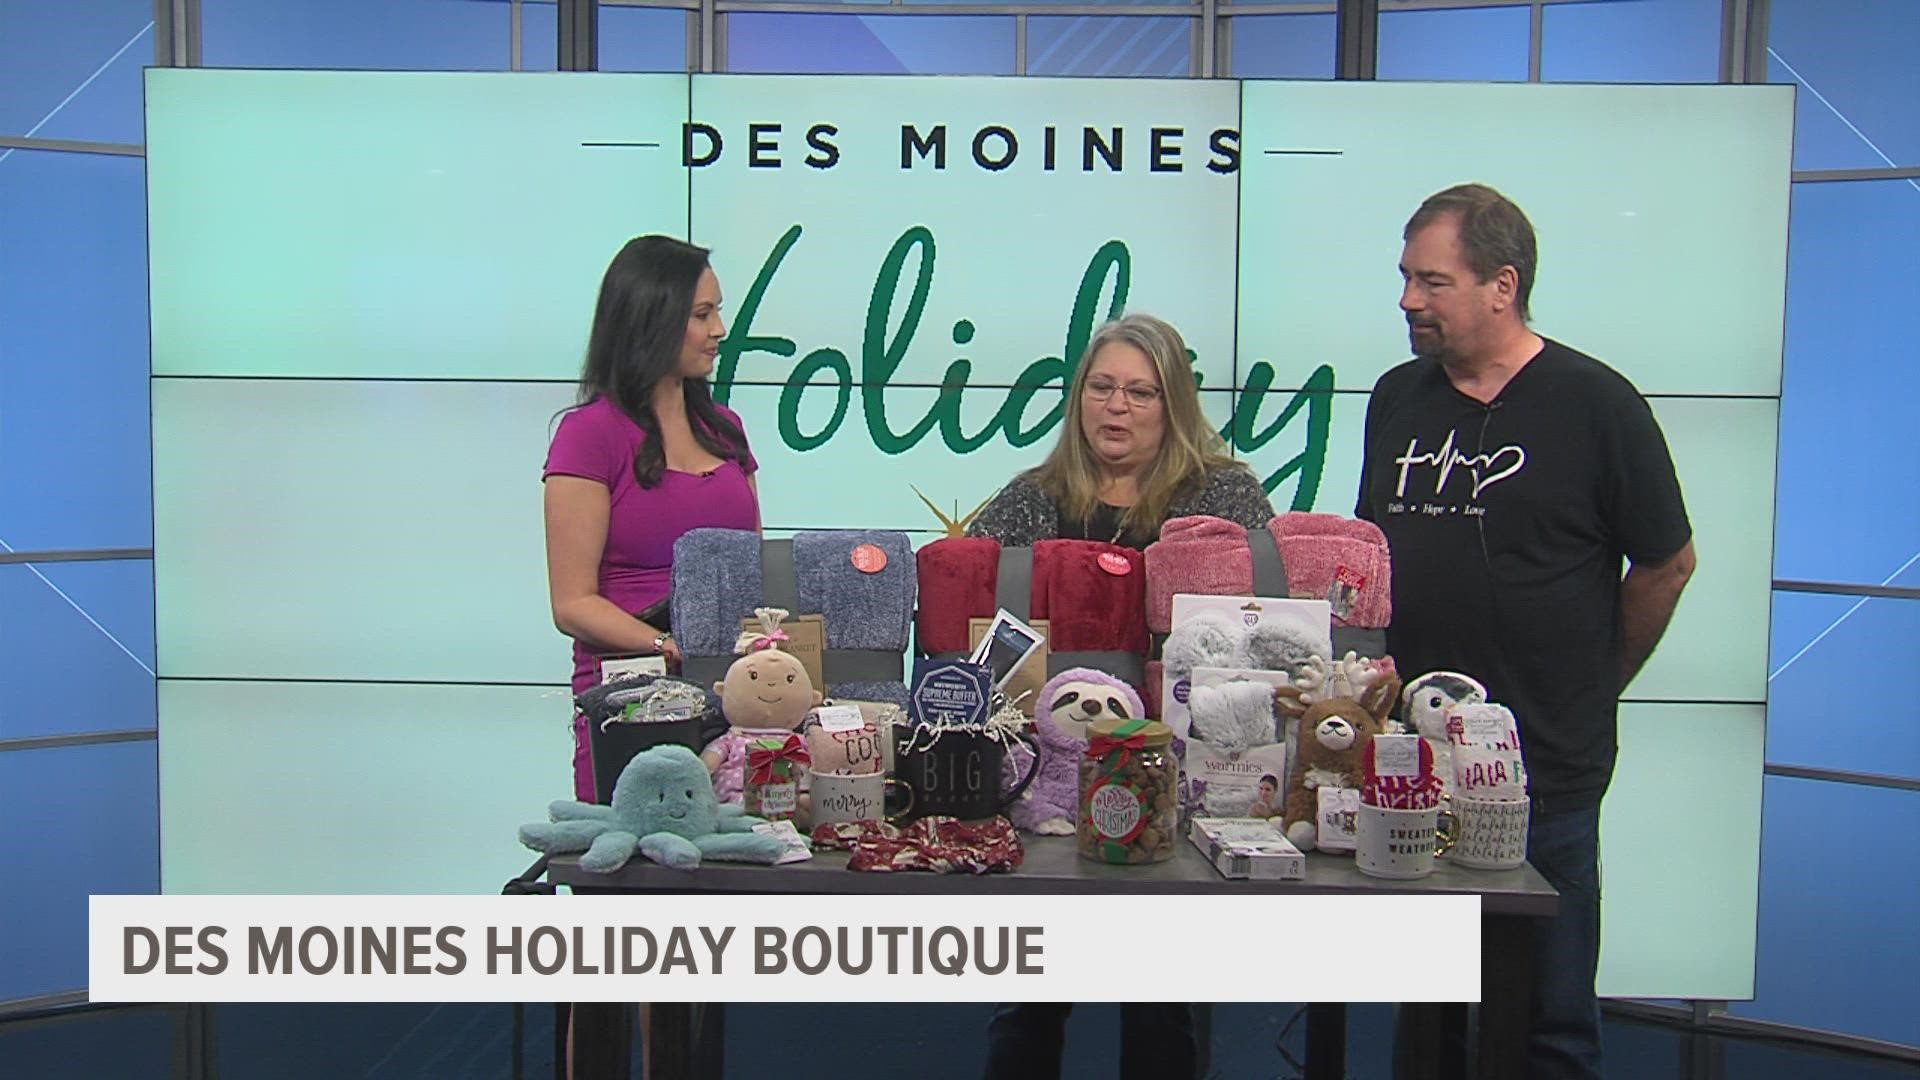 Vendor for Des Moines Holiday Boutique shows off gifts ahead of the